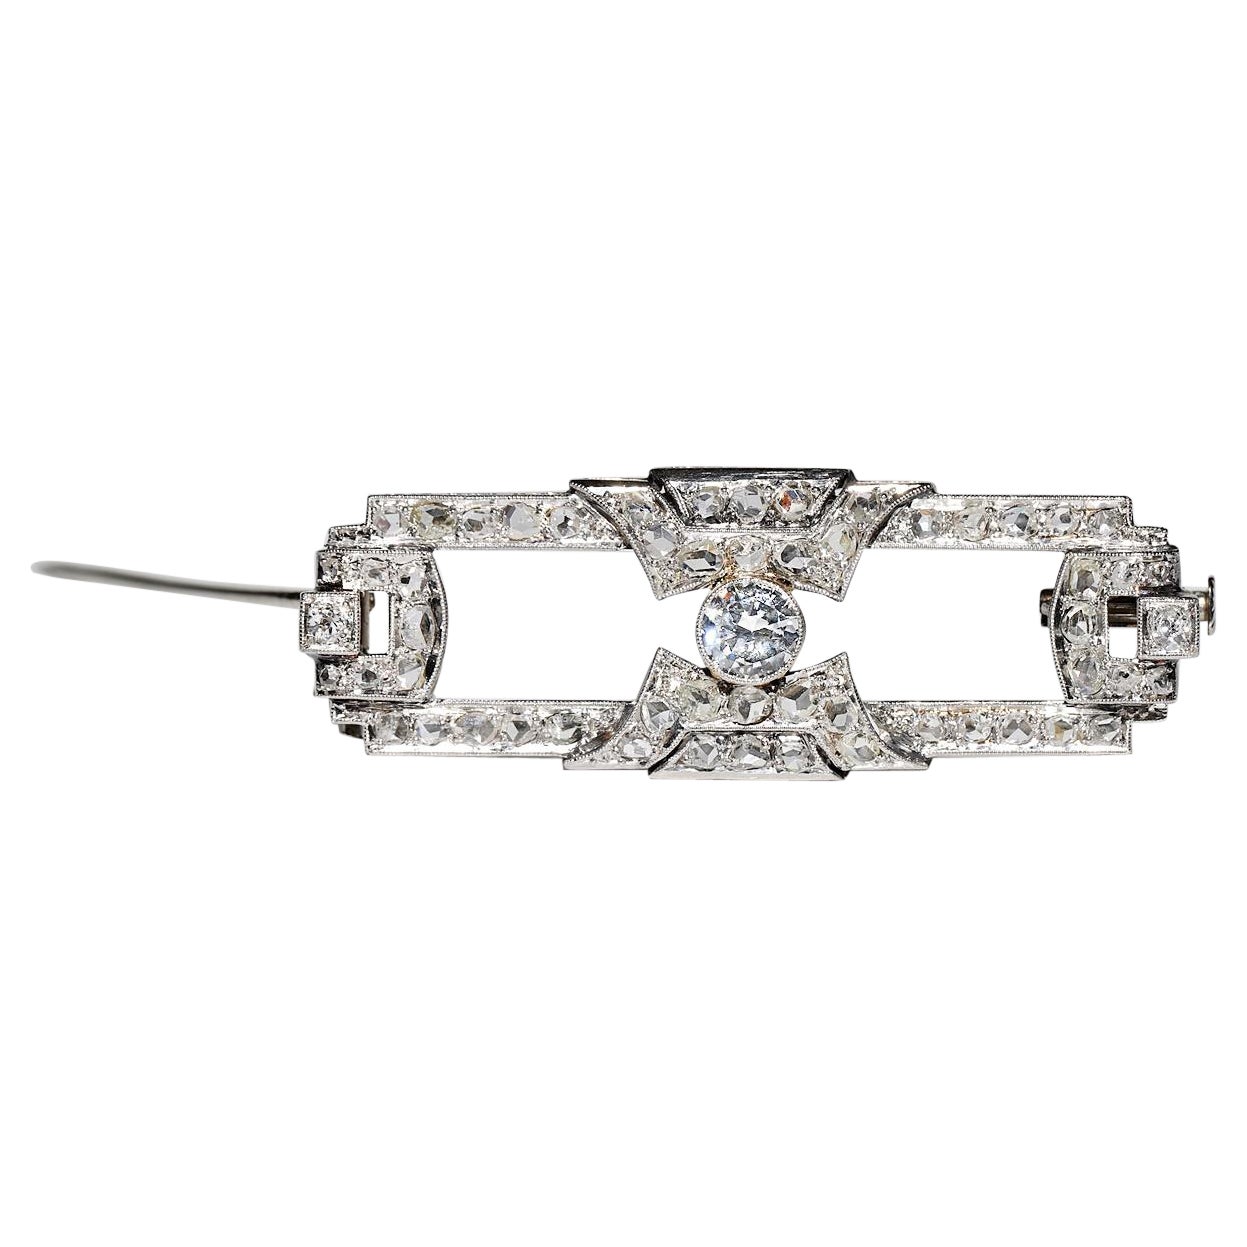 Antique Art Deco 1920 Platinum And 14K Gold Natural Diamond Decorated Brooch For Sale